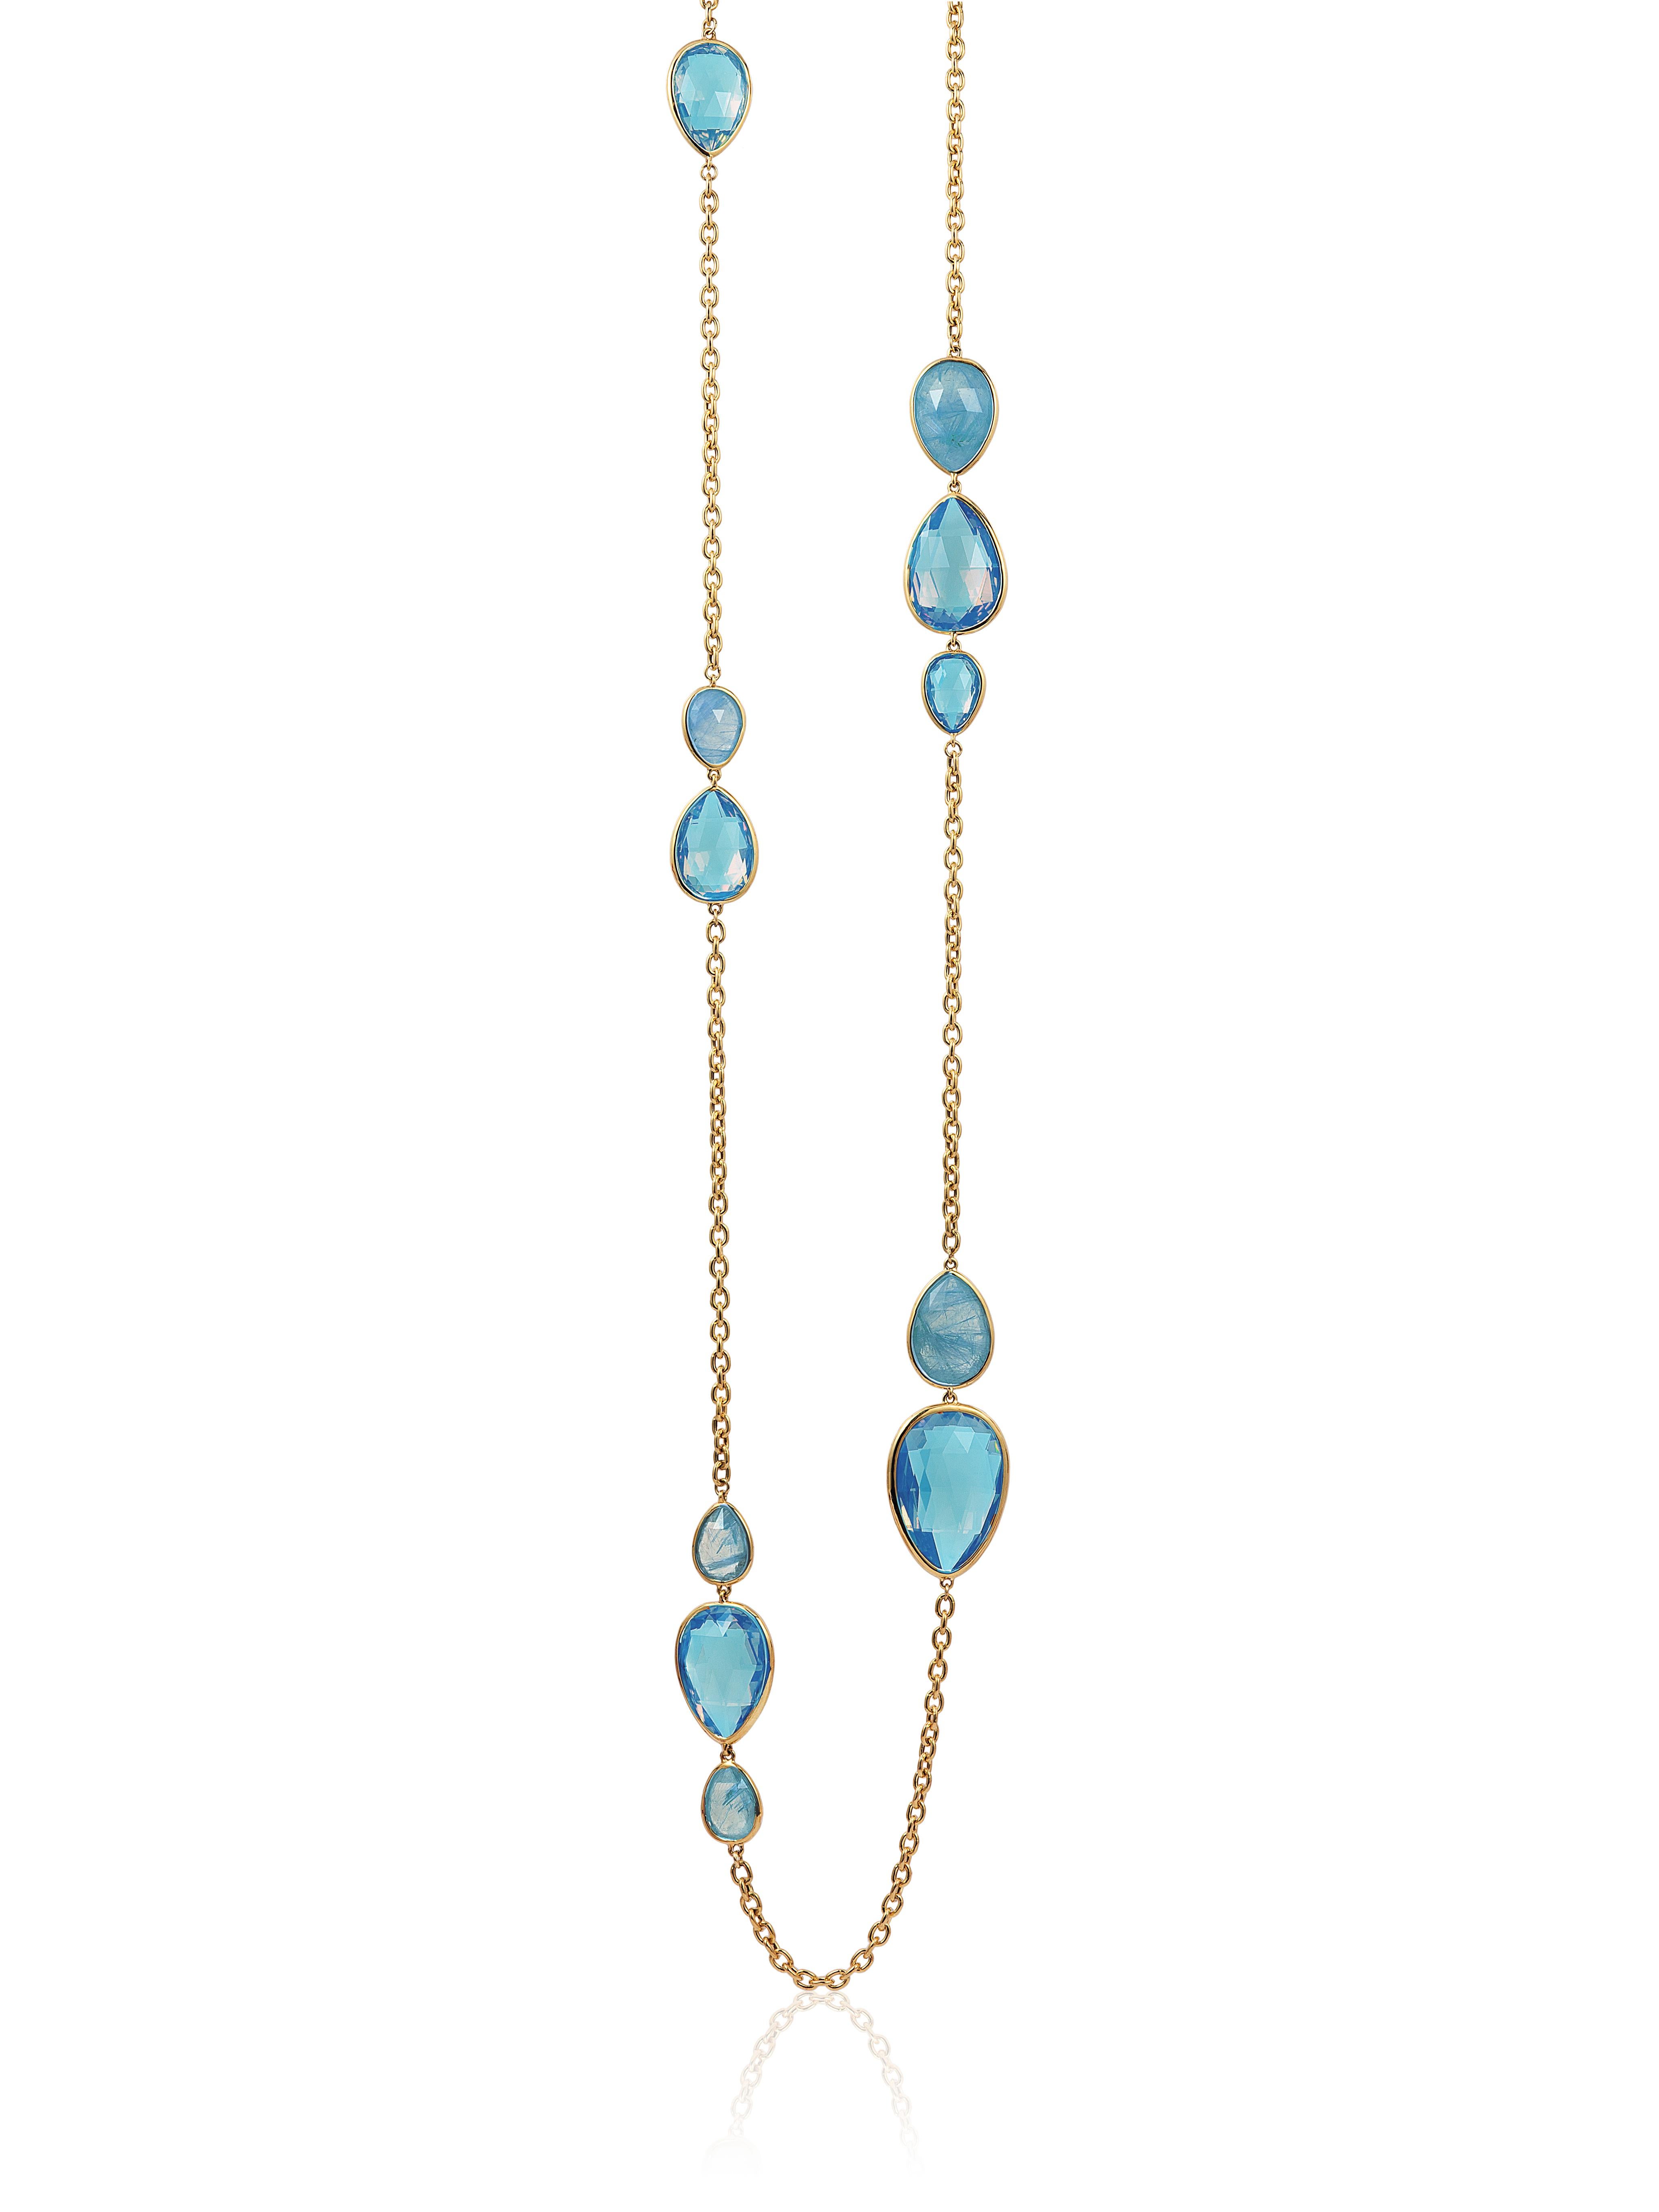 Blue Topaz Pear Shape Briolette Necklace on Oval Link Chain in 18K Yellow Gold, from ‘Gossip’ Collection  
Length: 36